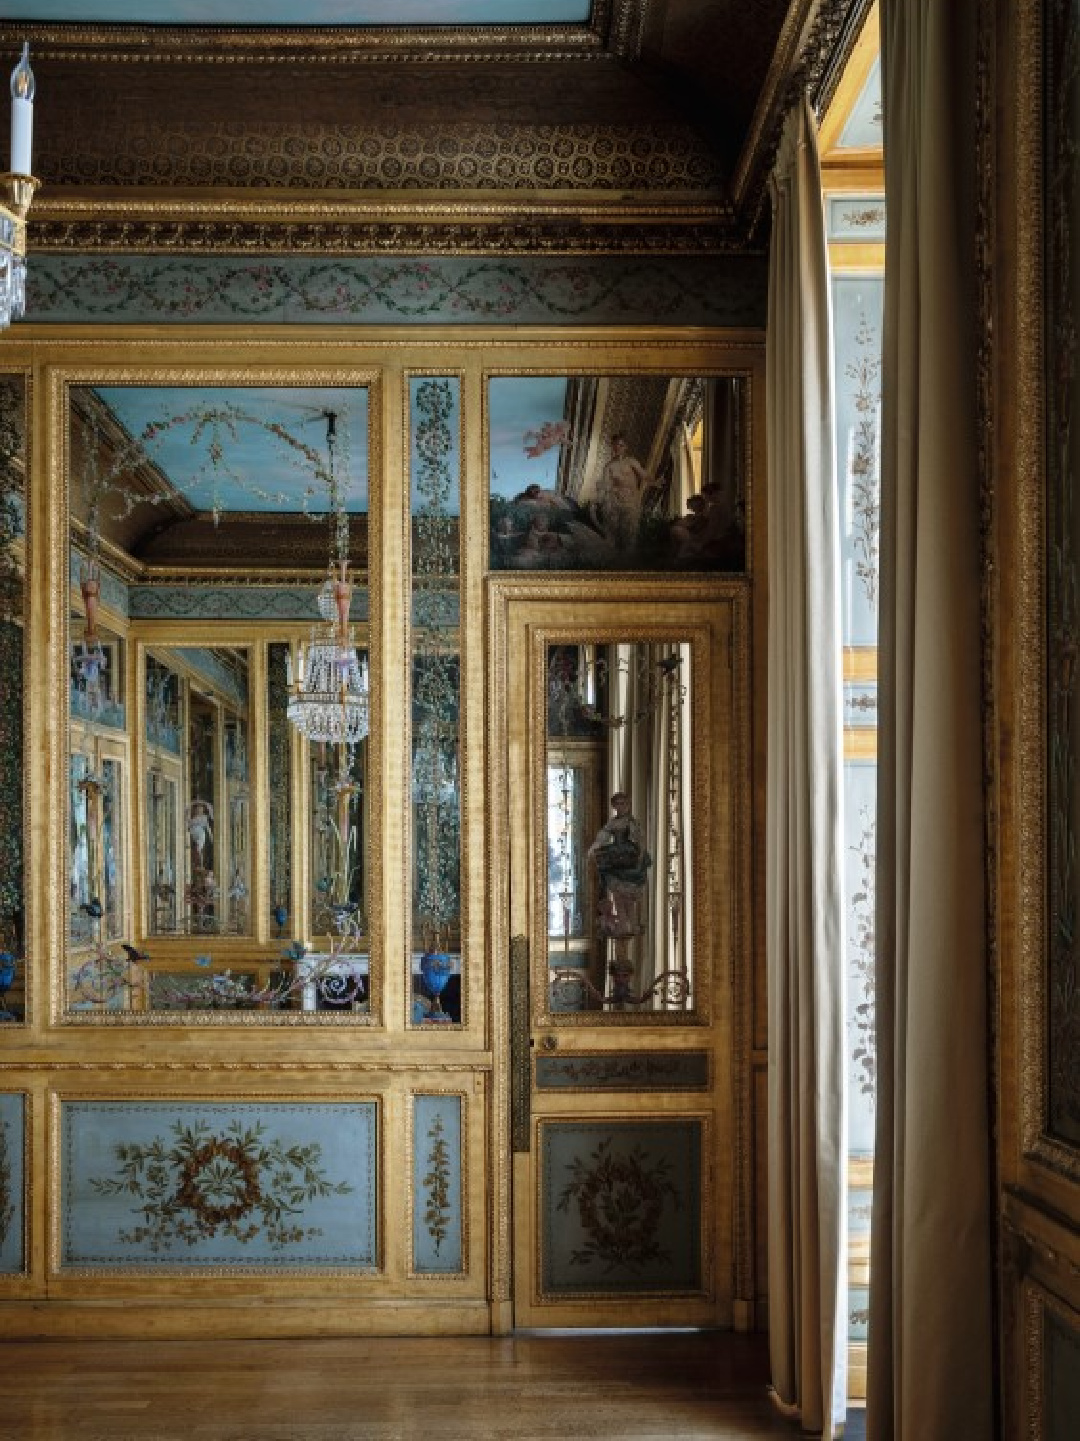 Paintings on glass in The Mirror Room of Élysée Palace. Photo from Presidential Residences in France (Flammarion 2021)